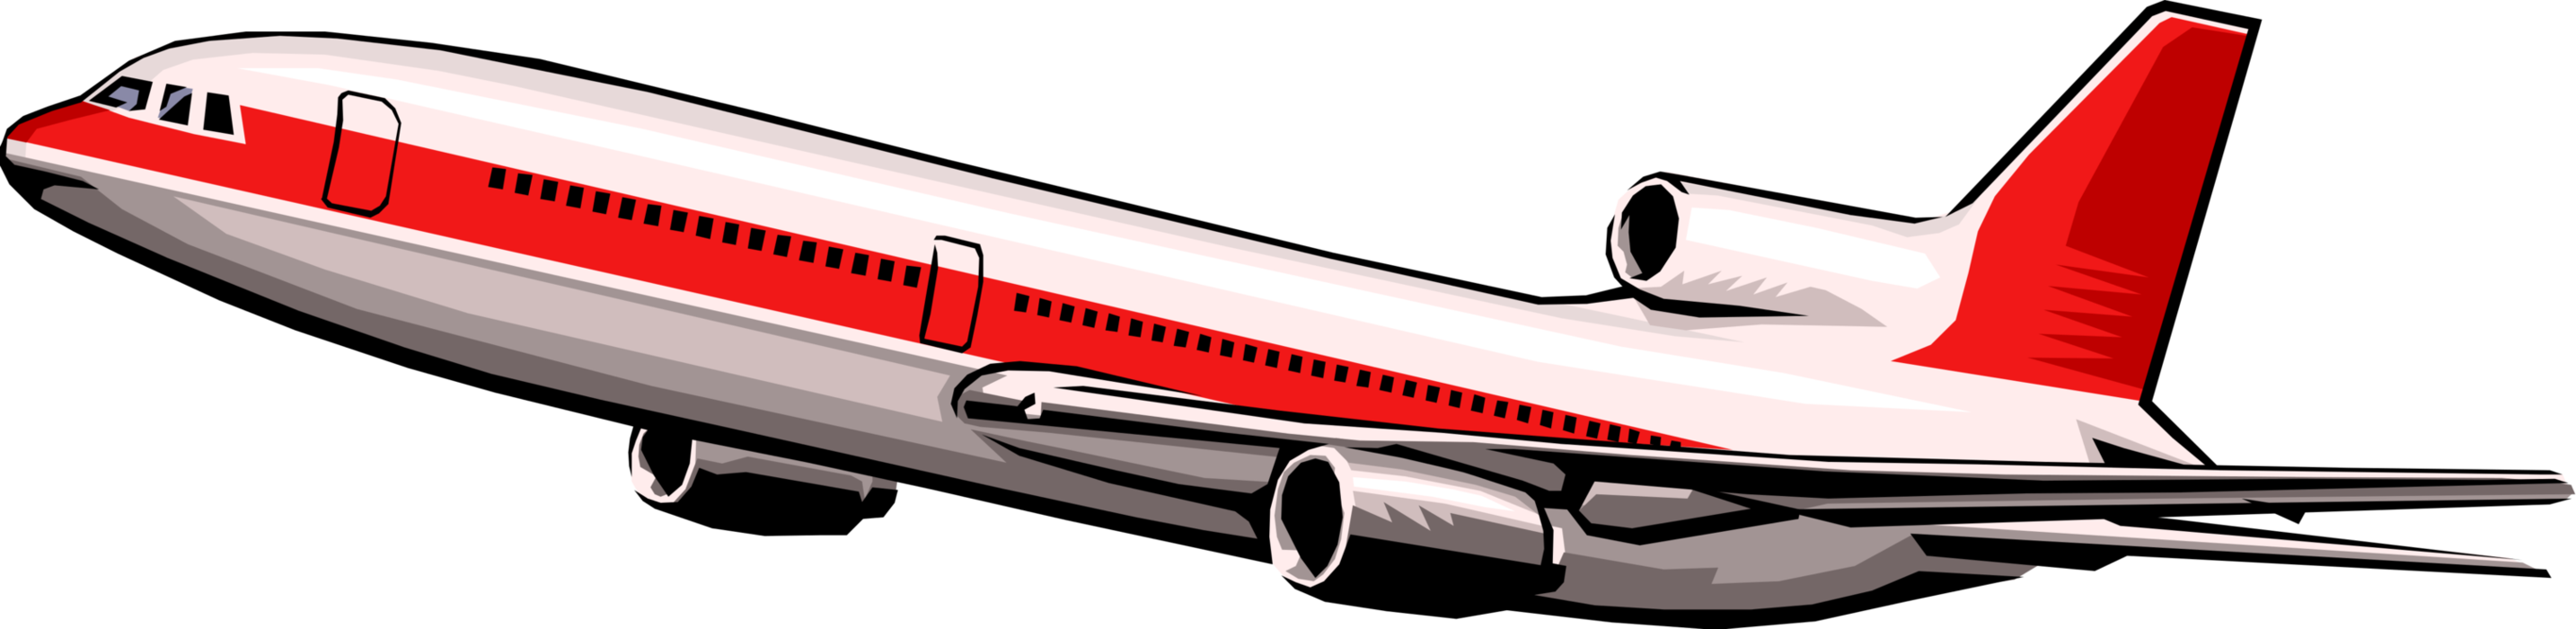 Vector Illustration of Commercial Passenger Jet Aircraft Airplane Takes Off